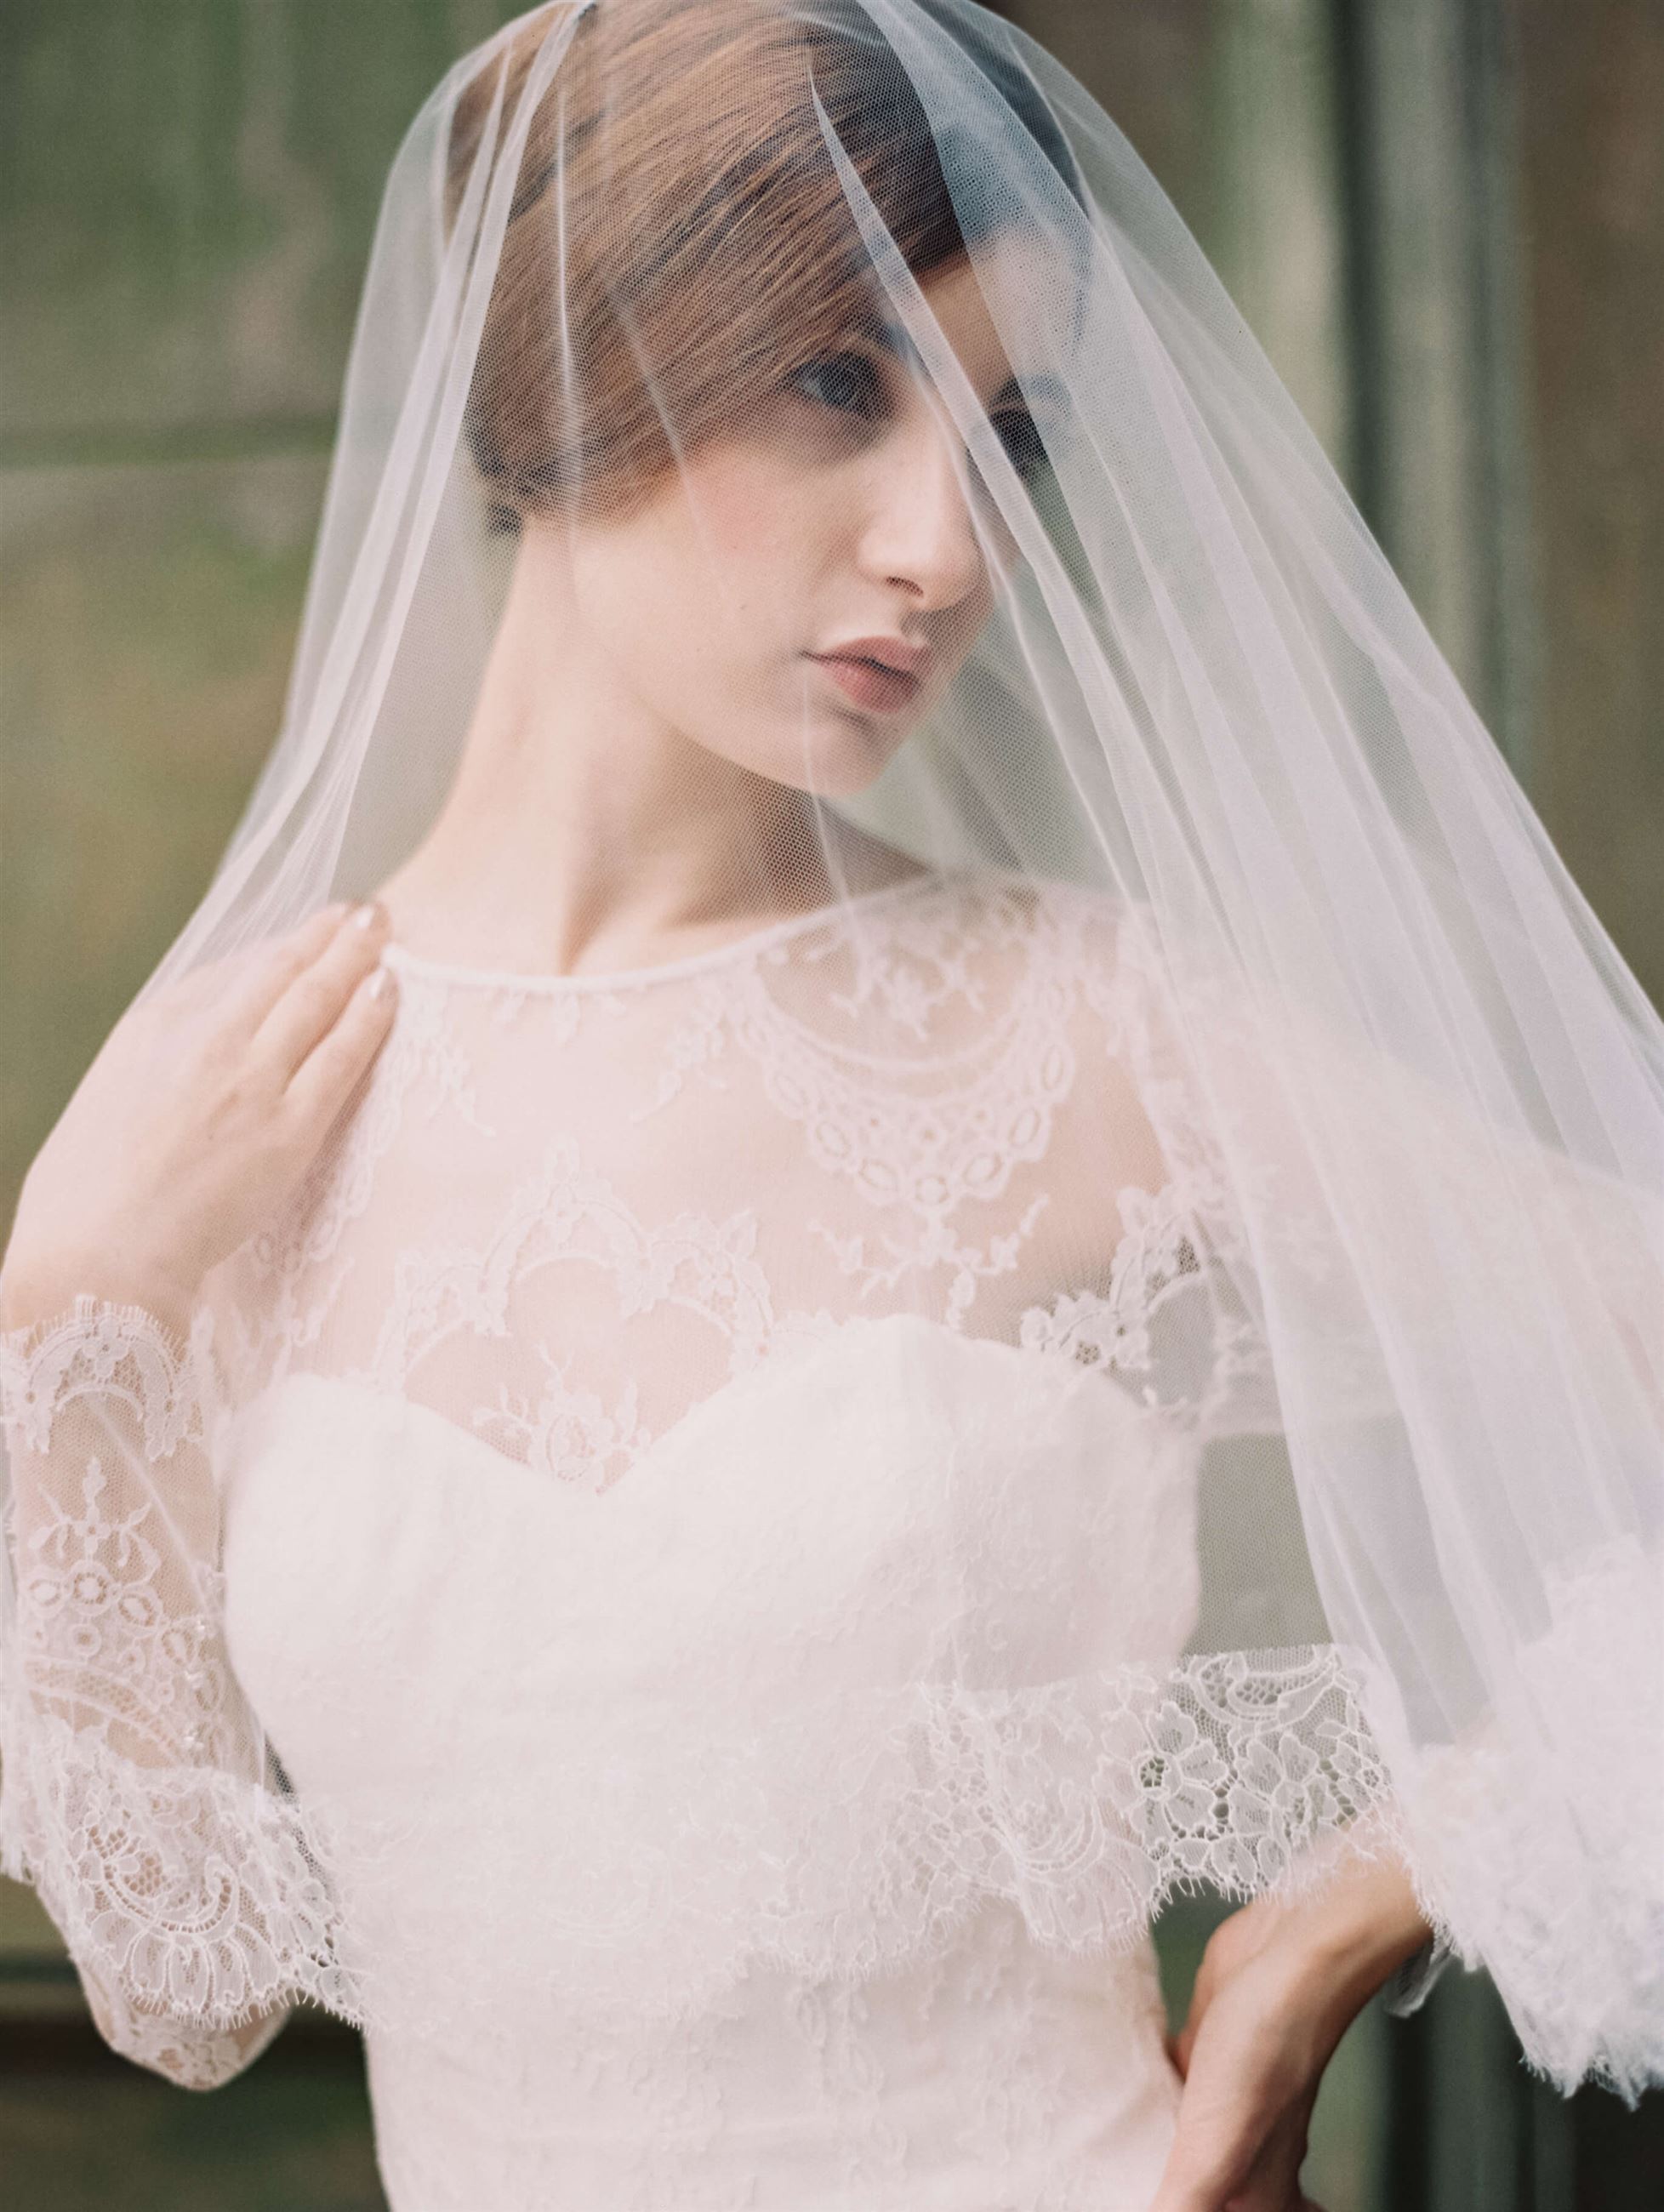 Photo of the posing model wearing white bridal gown under the veil